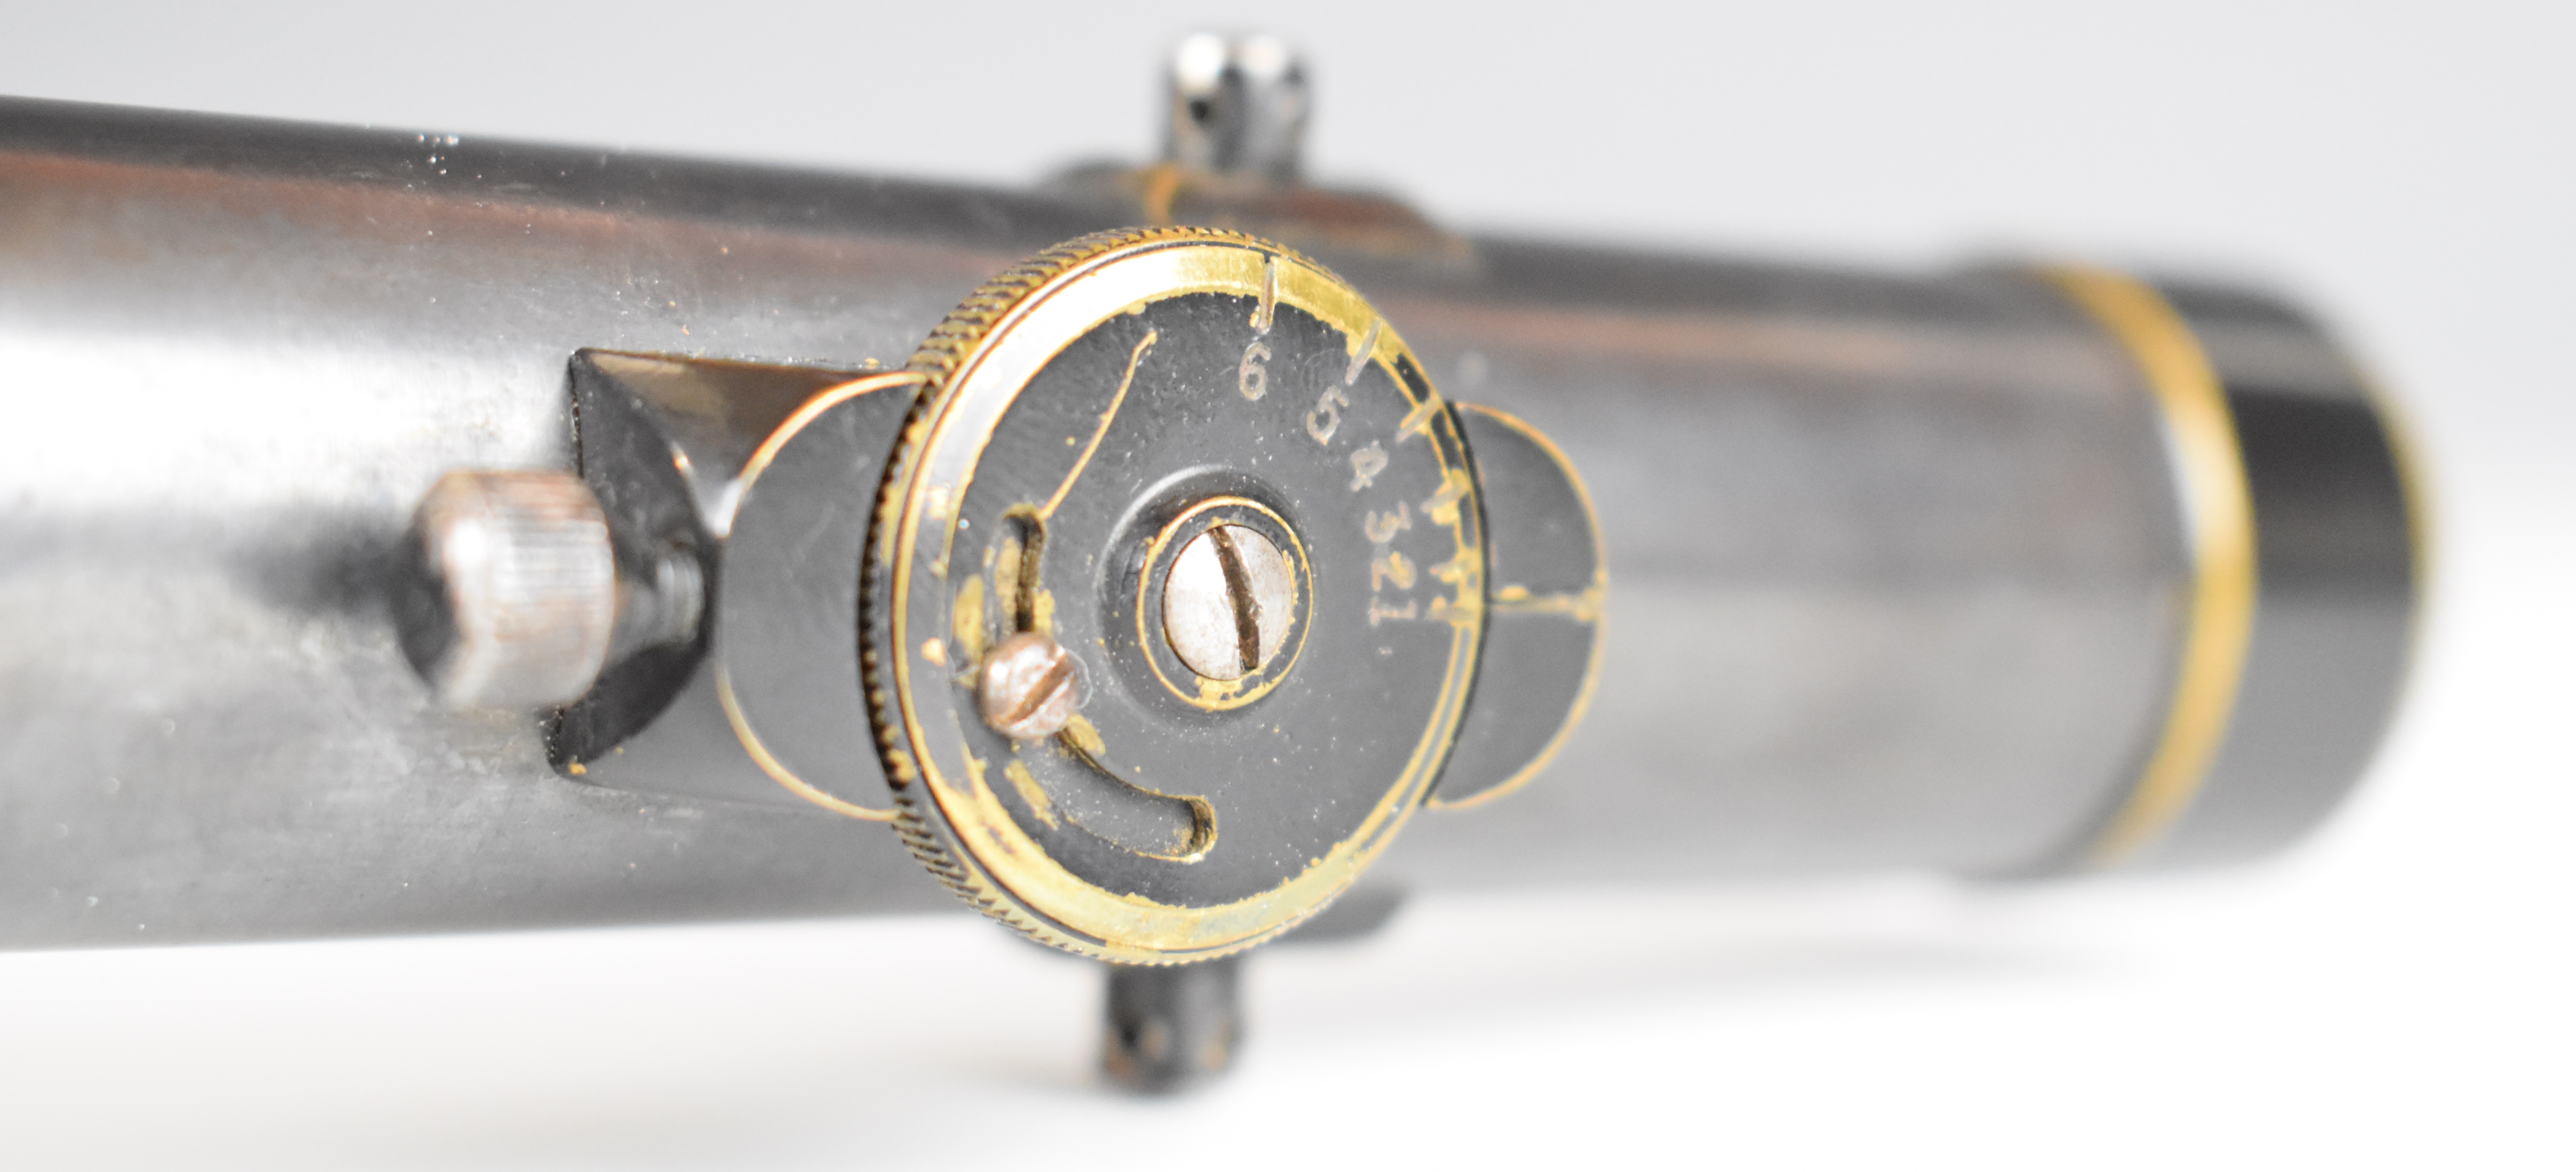 WWI Periscopic Prism Company Ltd of London Lee-Enfield adjustable sniper rifle scope, 31.3cm long. - Image 6 of 7